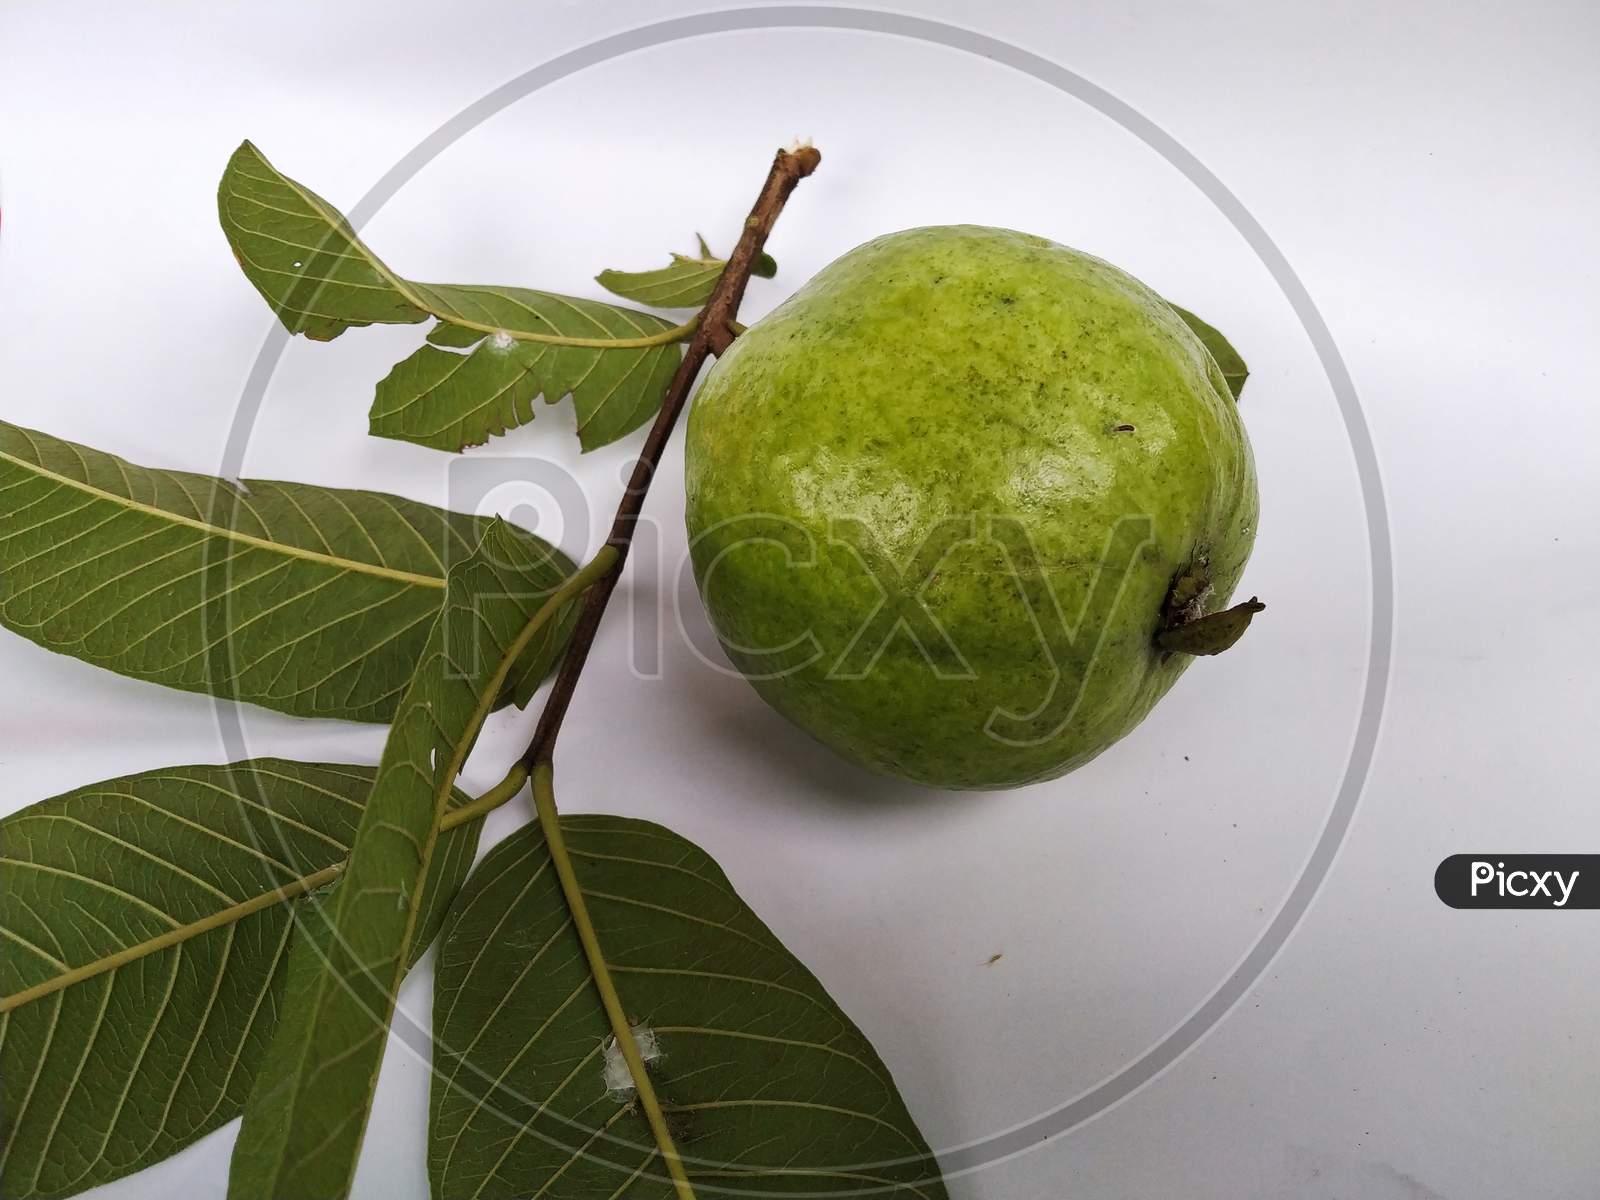 A Guava With Leaf And Stem In A White Background. Scientific Name: Psidium Guajava